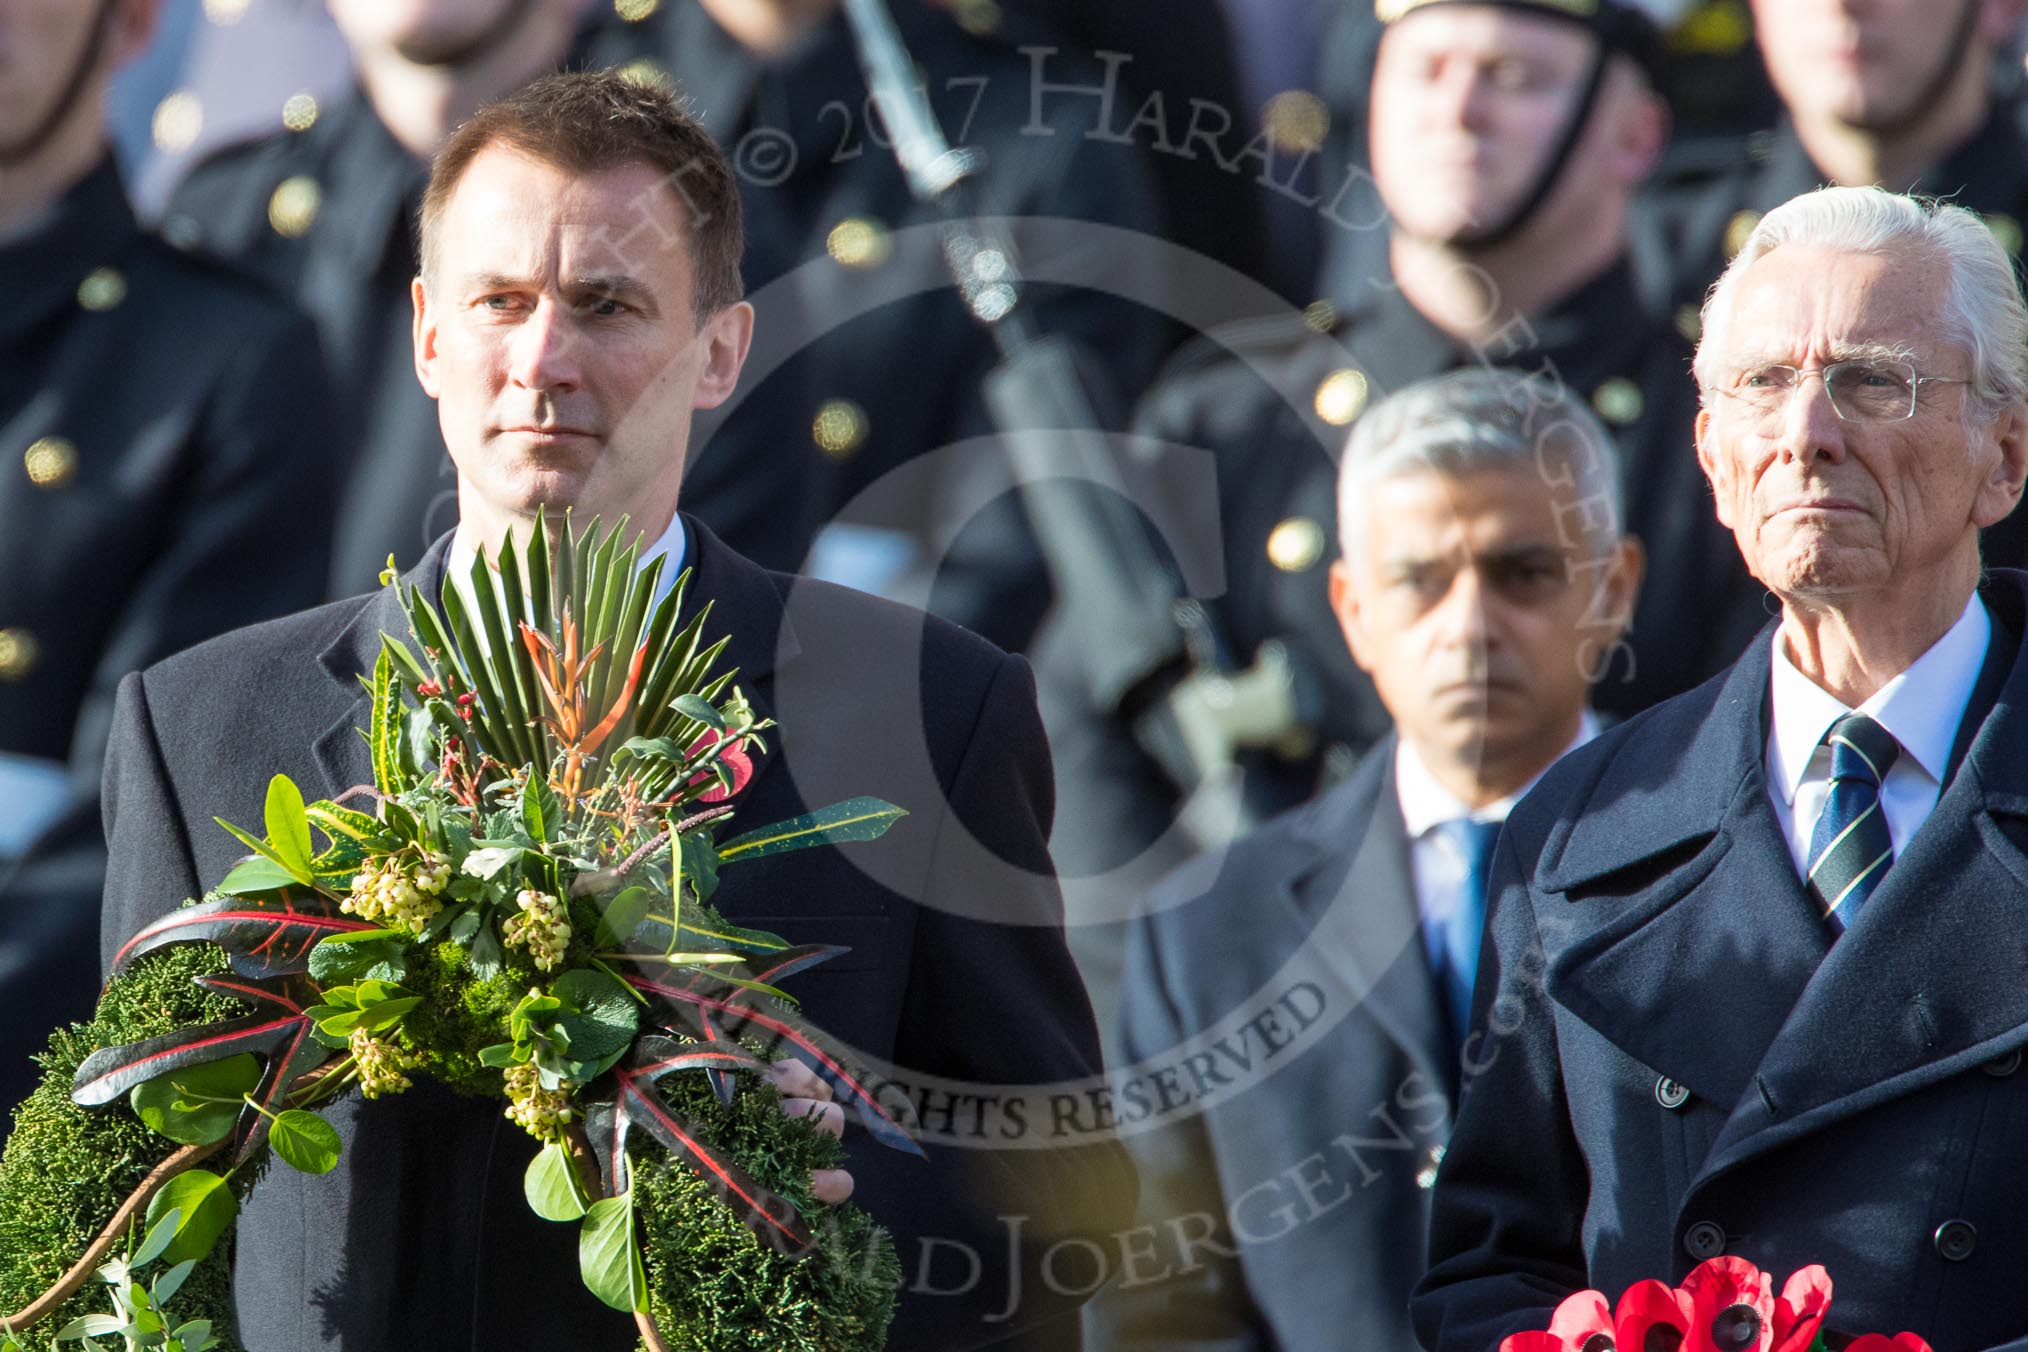 The Rt Hon Jeremy Hunt MP, Secretary of State for Foreign and Commonwealth Affairs, on behalf of the United Kingdom Overseas Territories and The Rt Hon The Lord Fowler, Lord Speaker, (on behalf of Parliament representing members of the House of Lords)   with their wreaths during the Remembrance Sunday Cenotaph Ceremony 2018 at Horse Guards Parade, Westminster, London, 11 November 2018, 10:57.